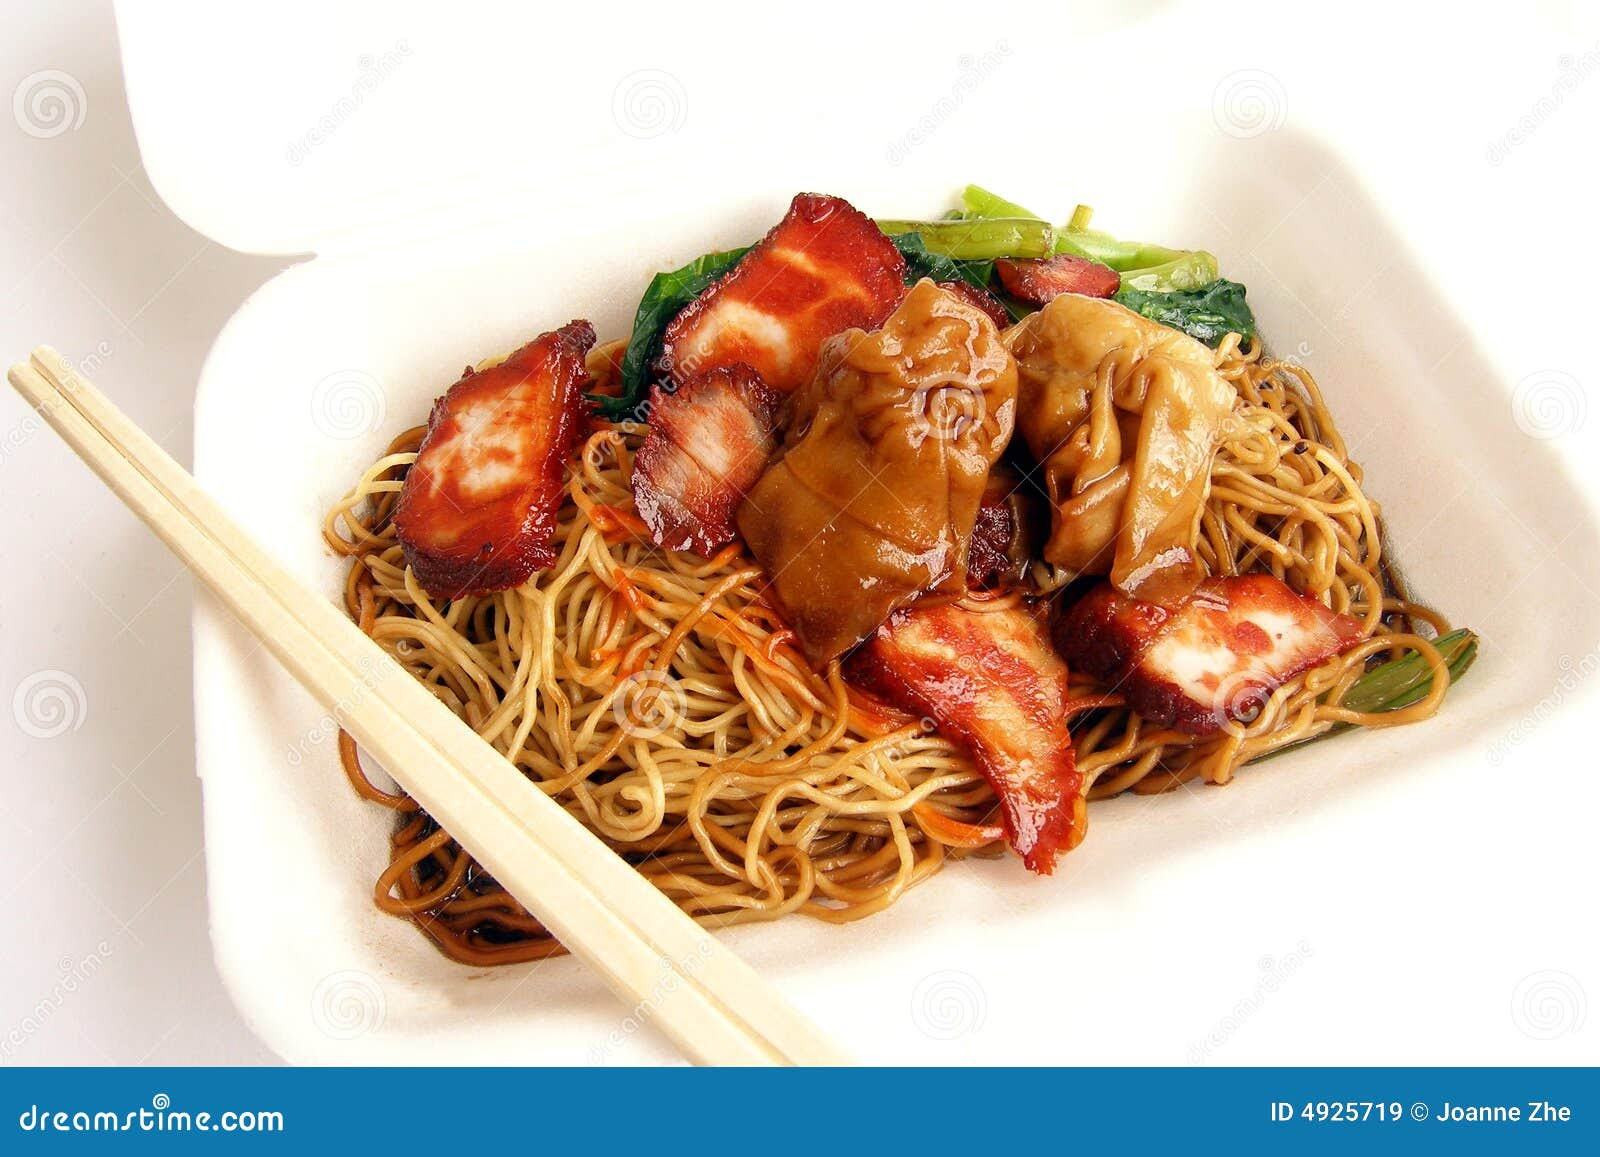 Chinese Food Menu Take OUt Recipes Meme Box Noodles Near Me Clipart Images Pics Photos Pictures